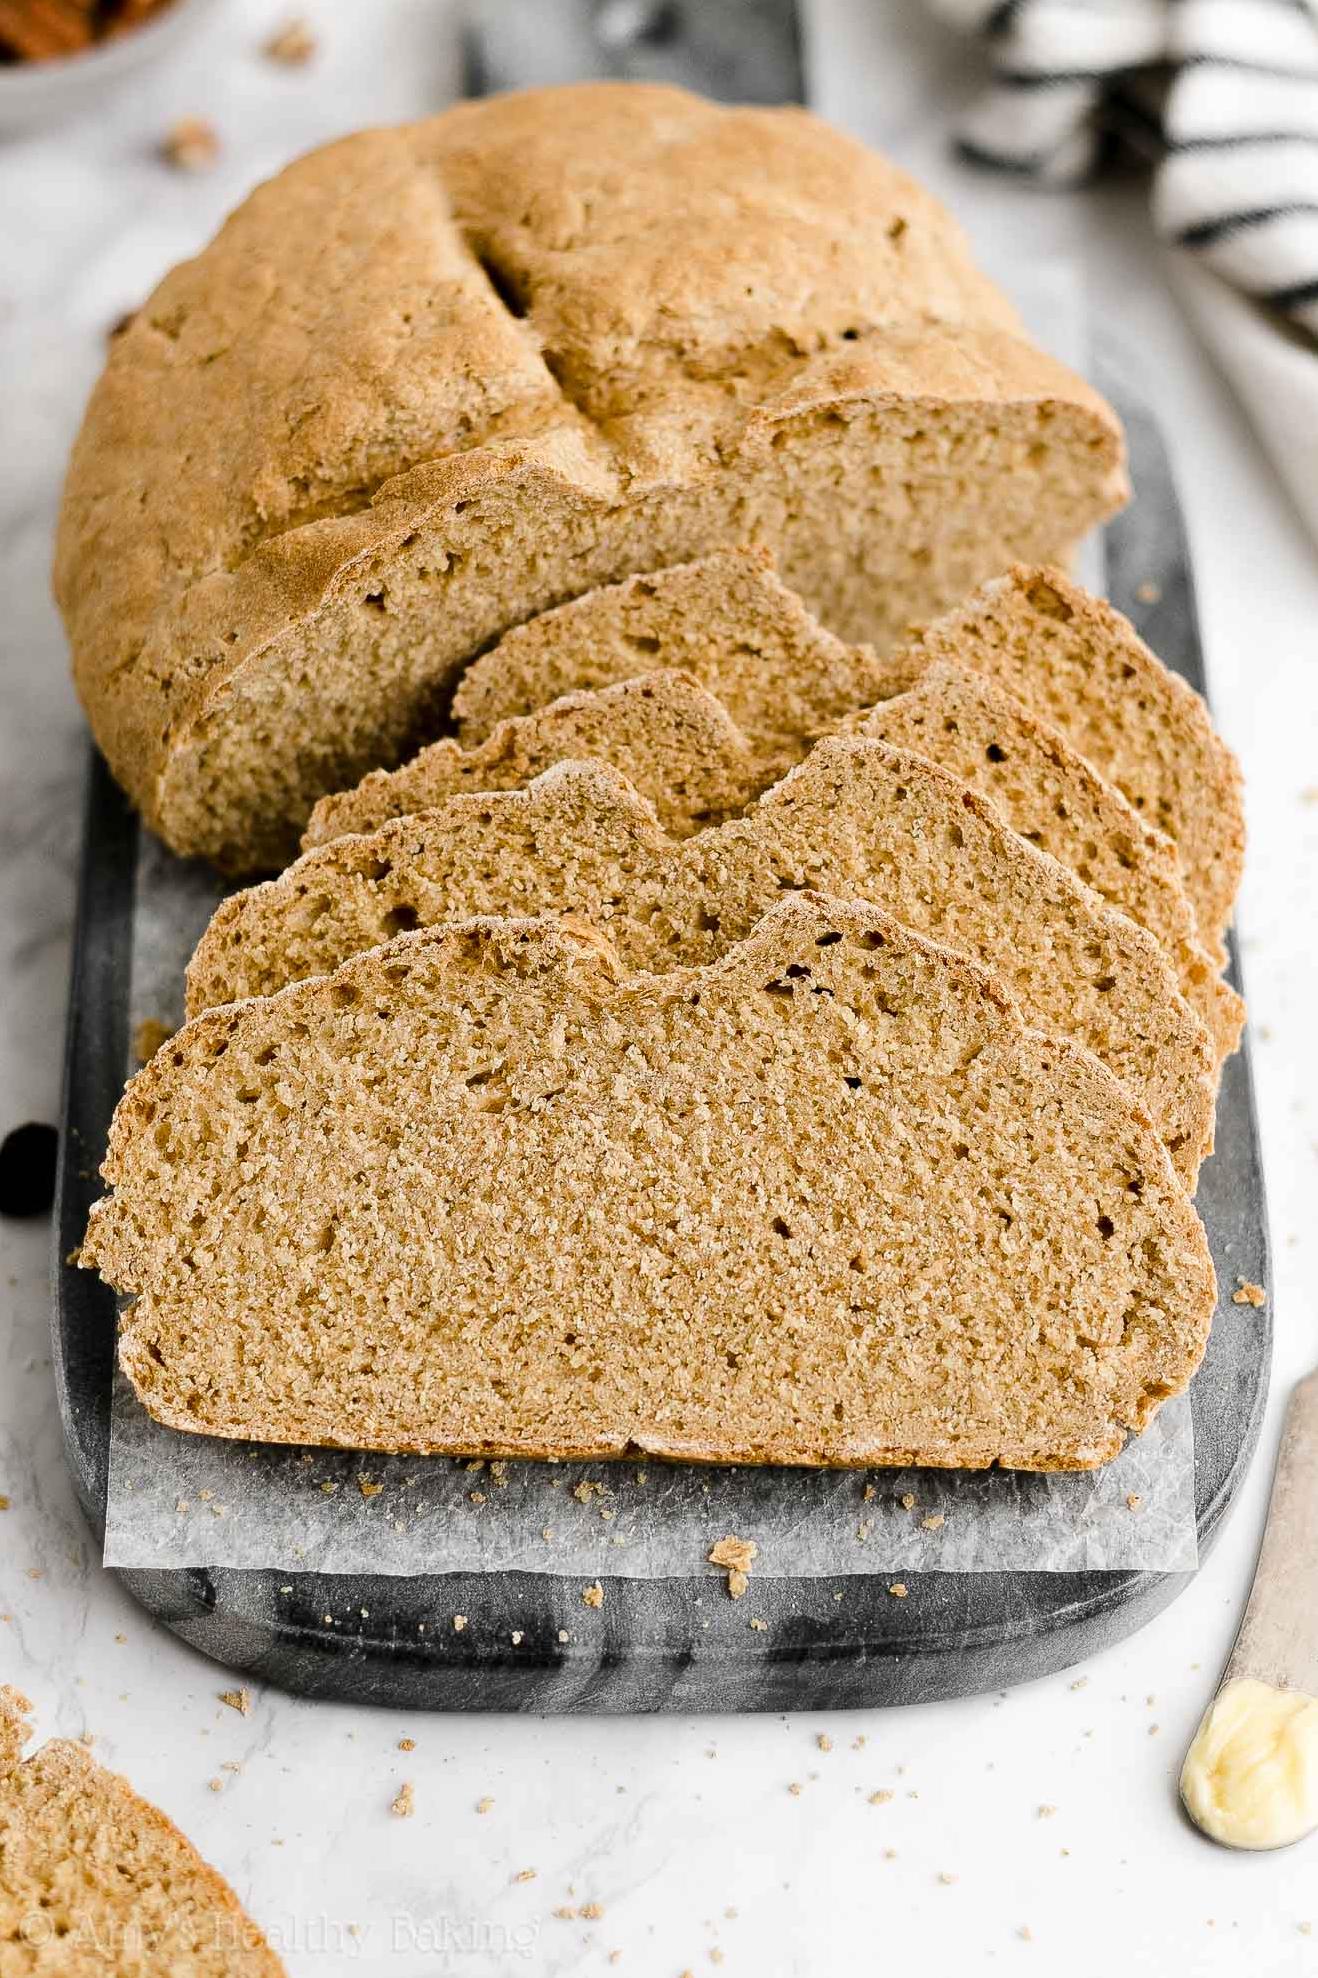  You won't find any artificial additives in this soda bread.